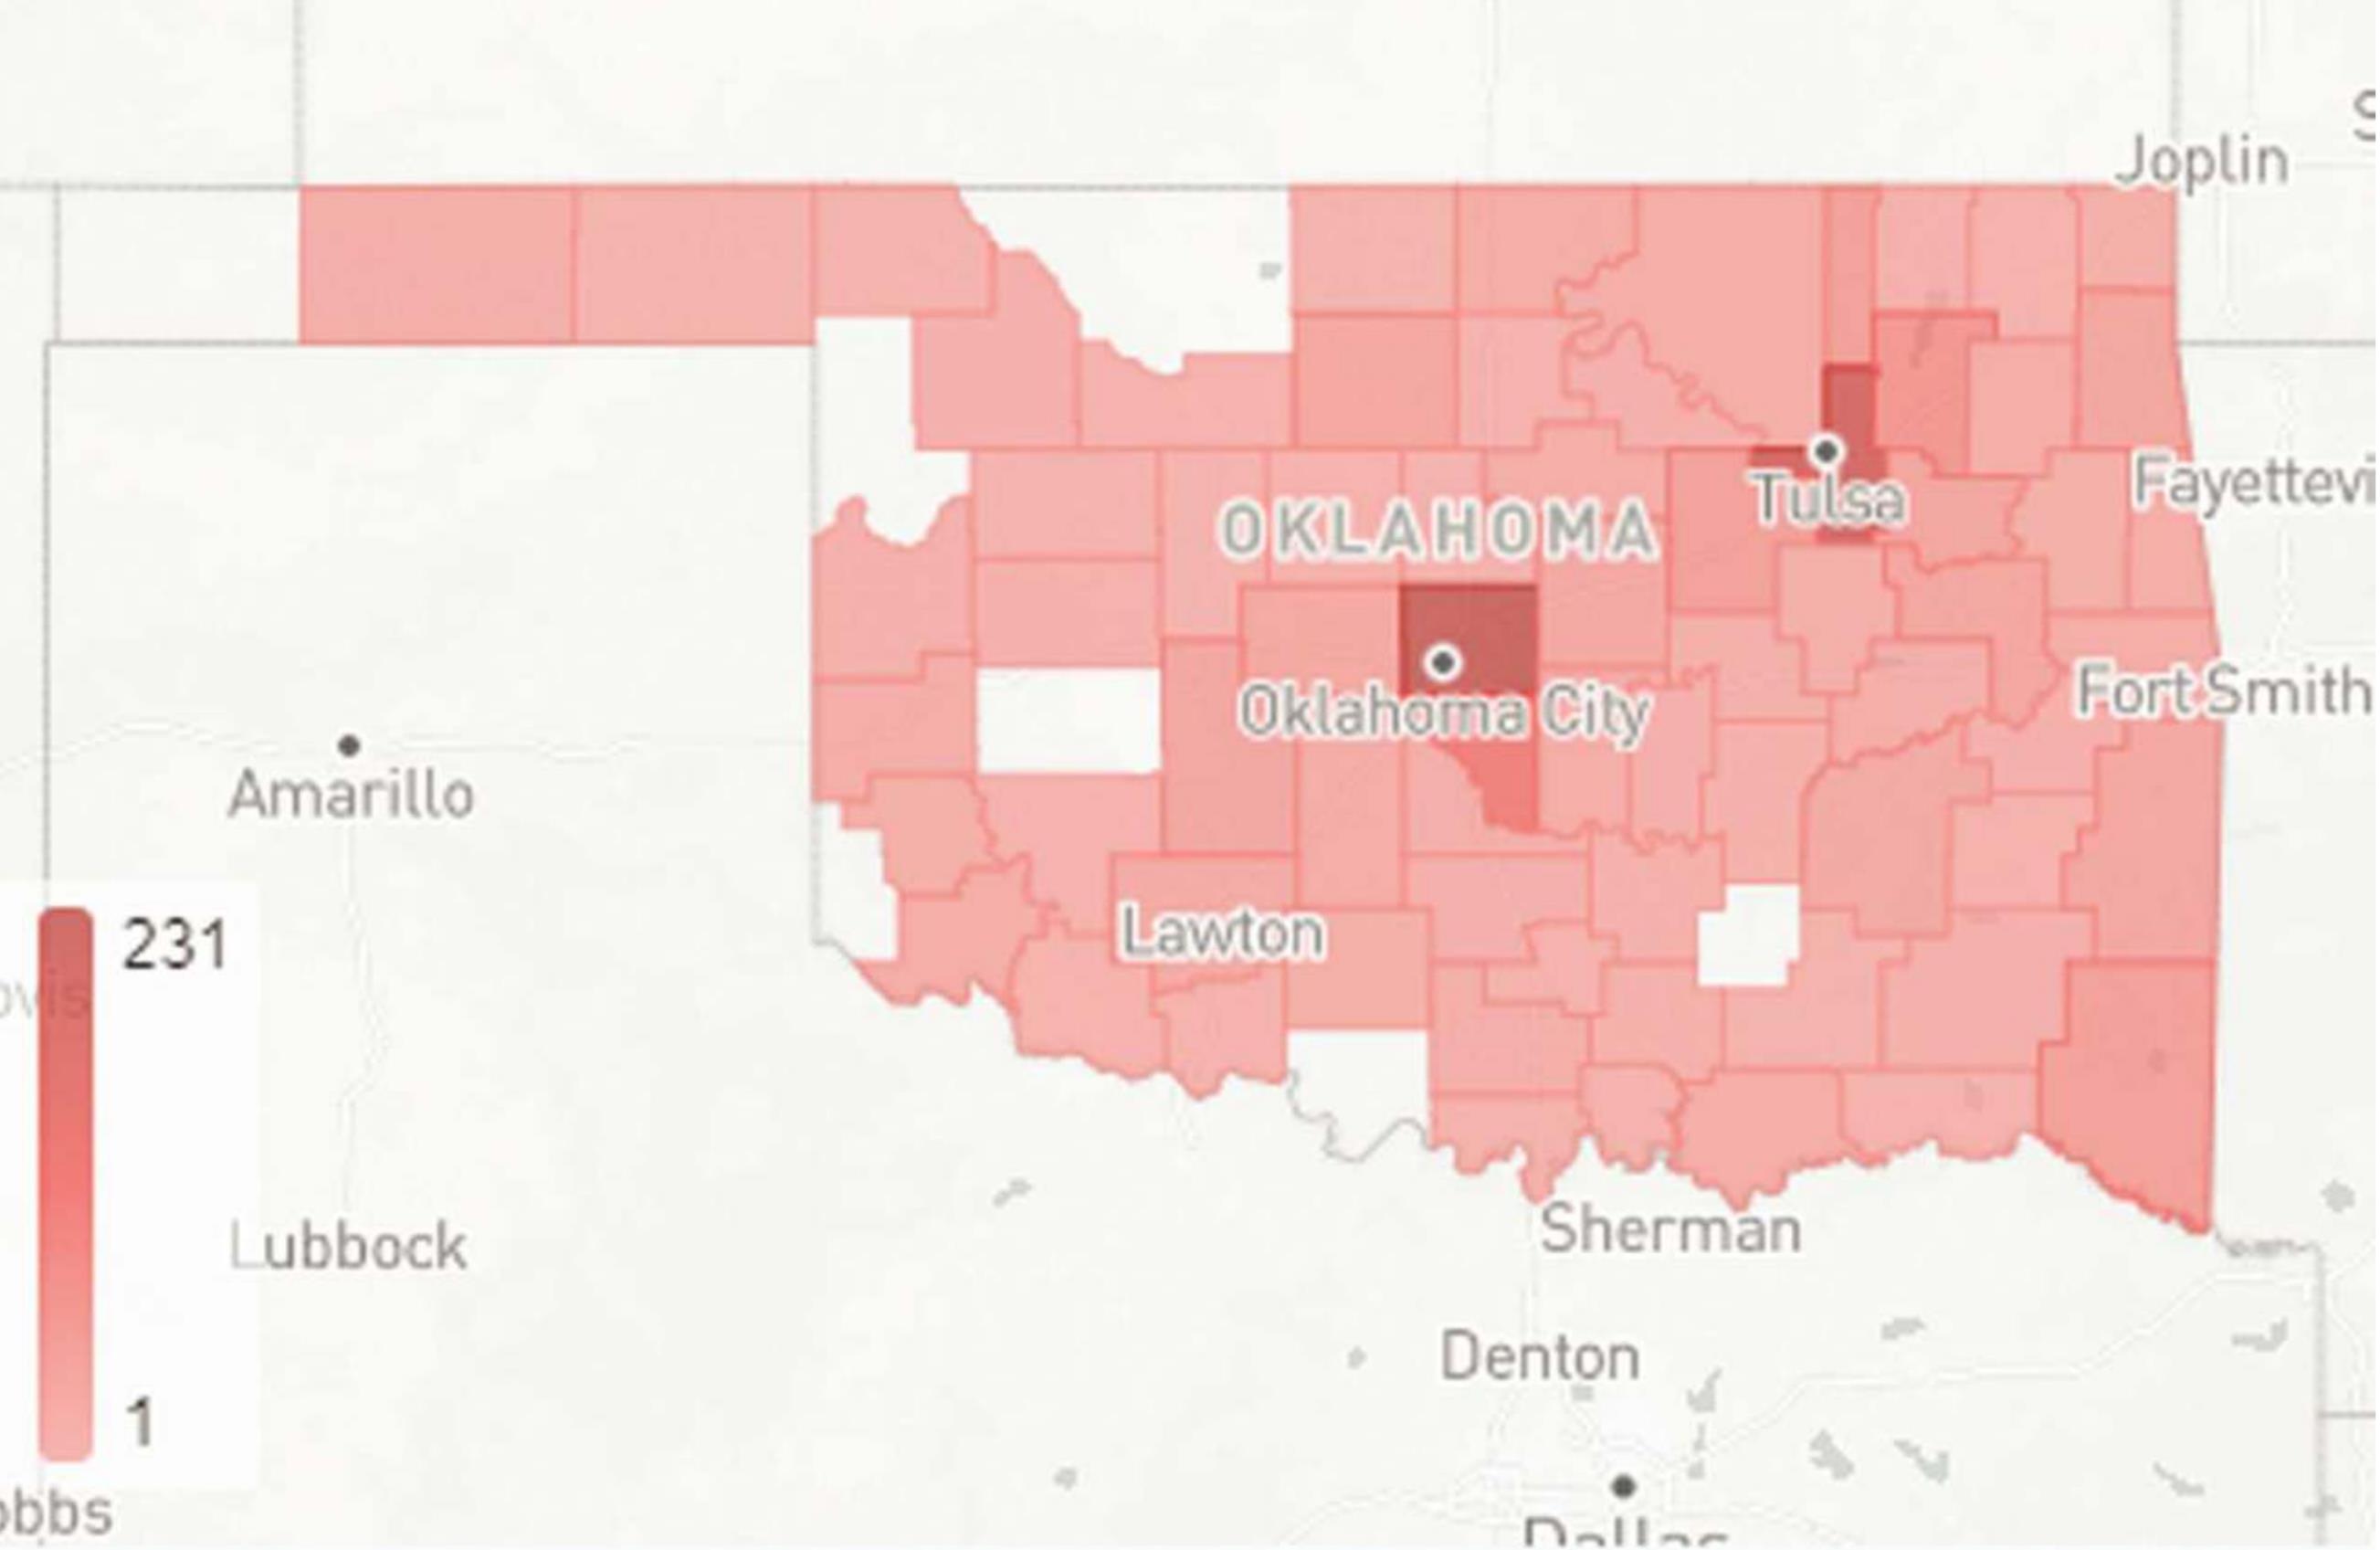 Above, this map shows the total number of deaths associated with COVID-19 in Oklahoma by county. Provided